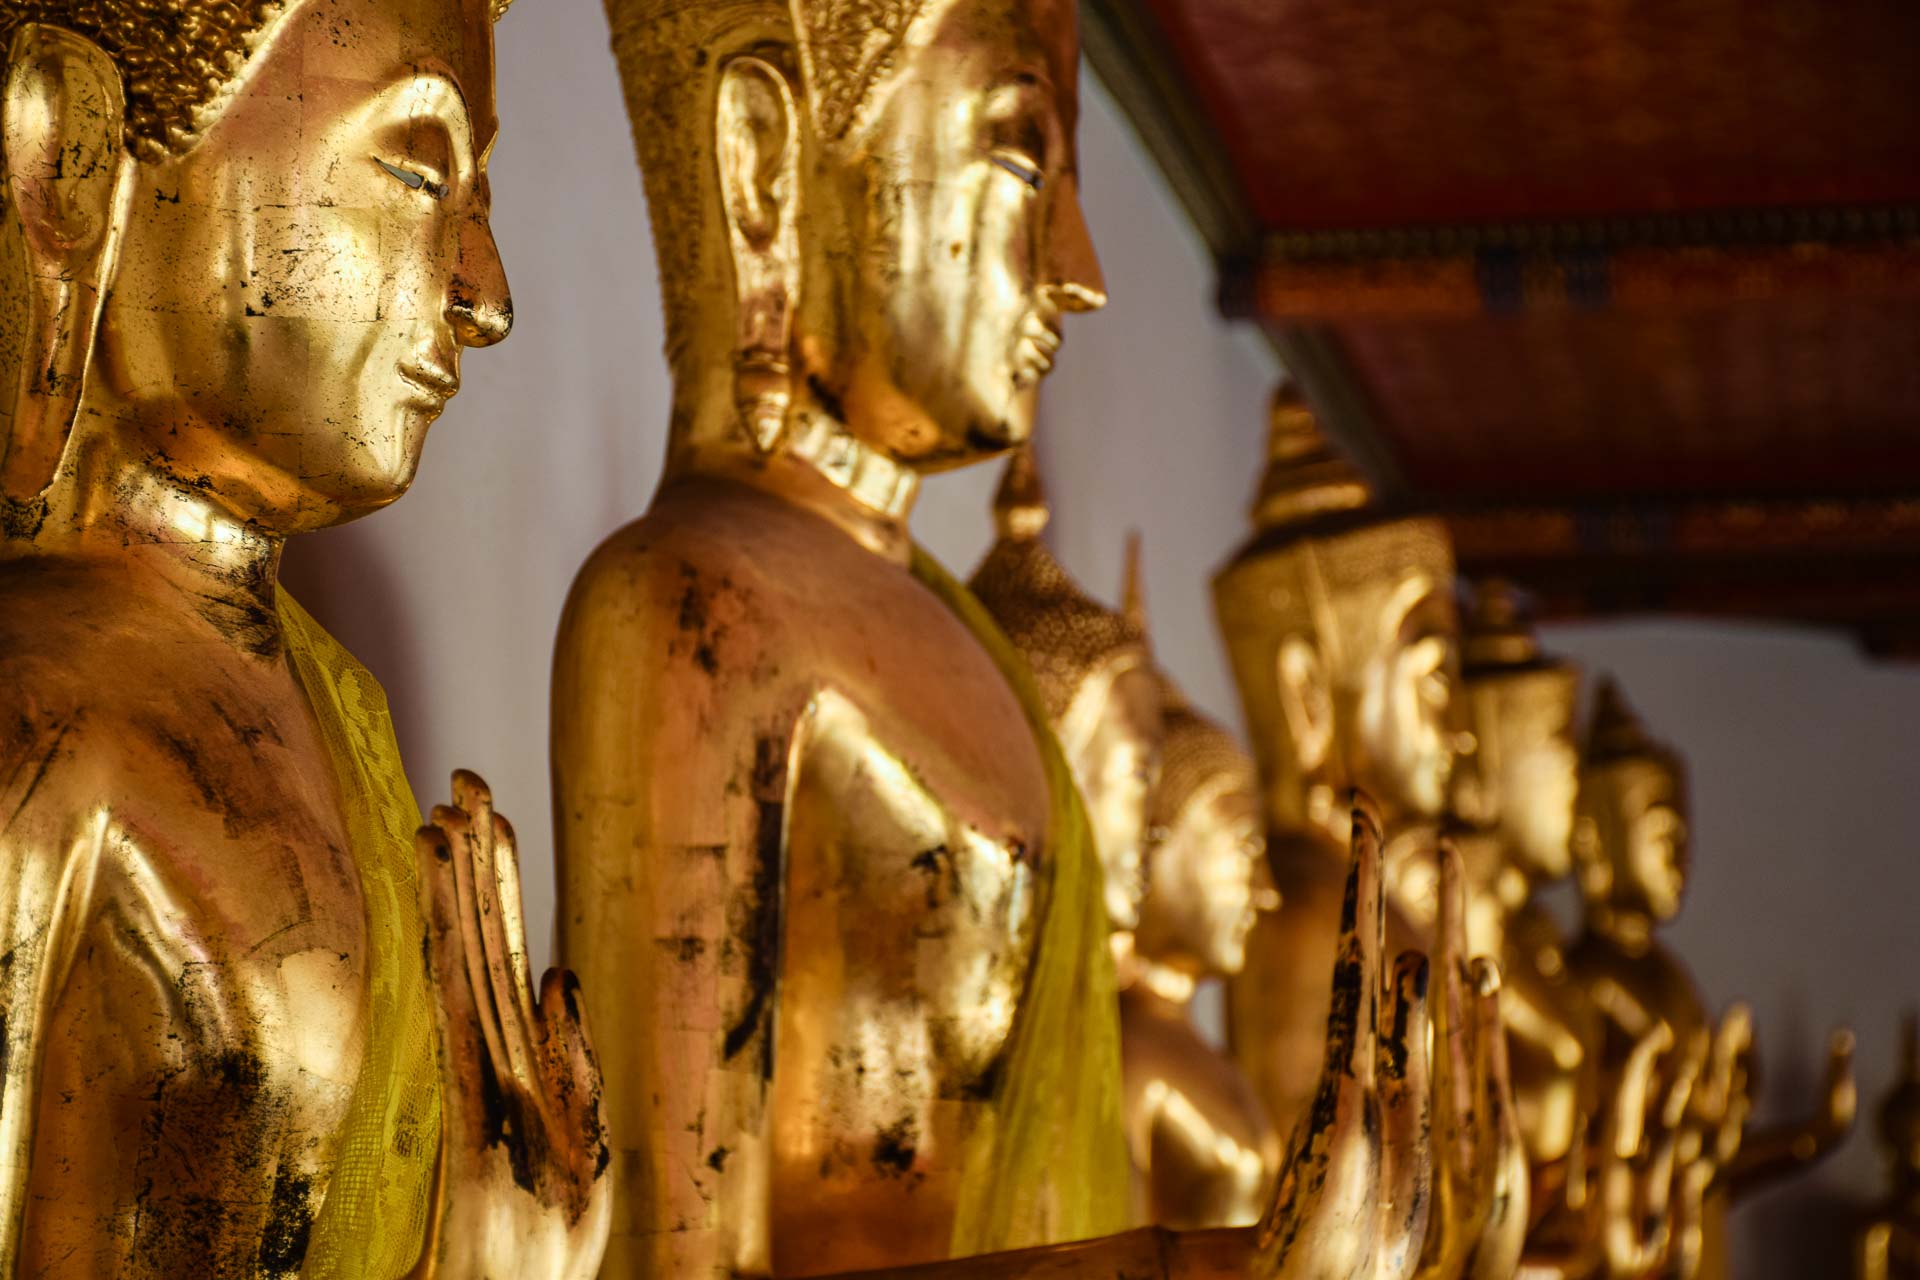 A line of golden Buddhas in a buddhist temple